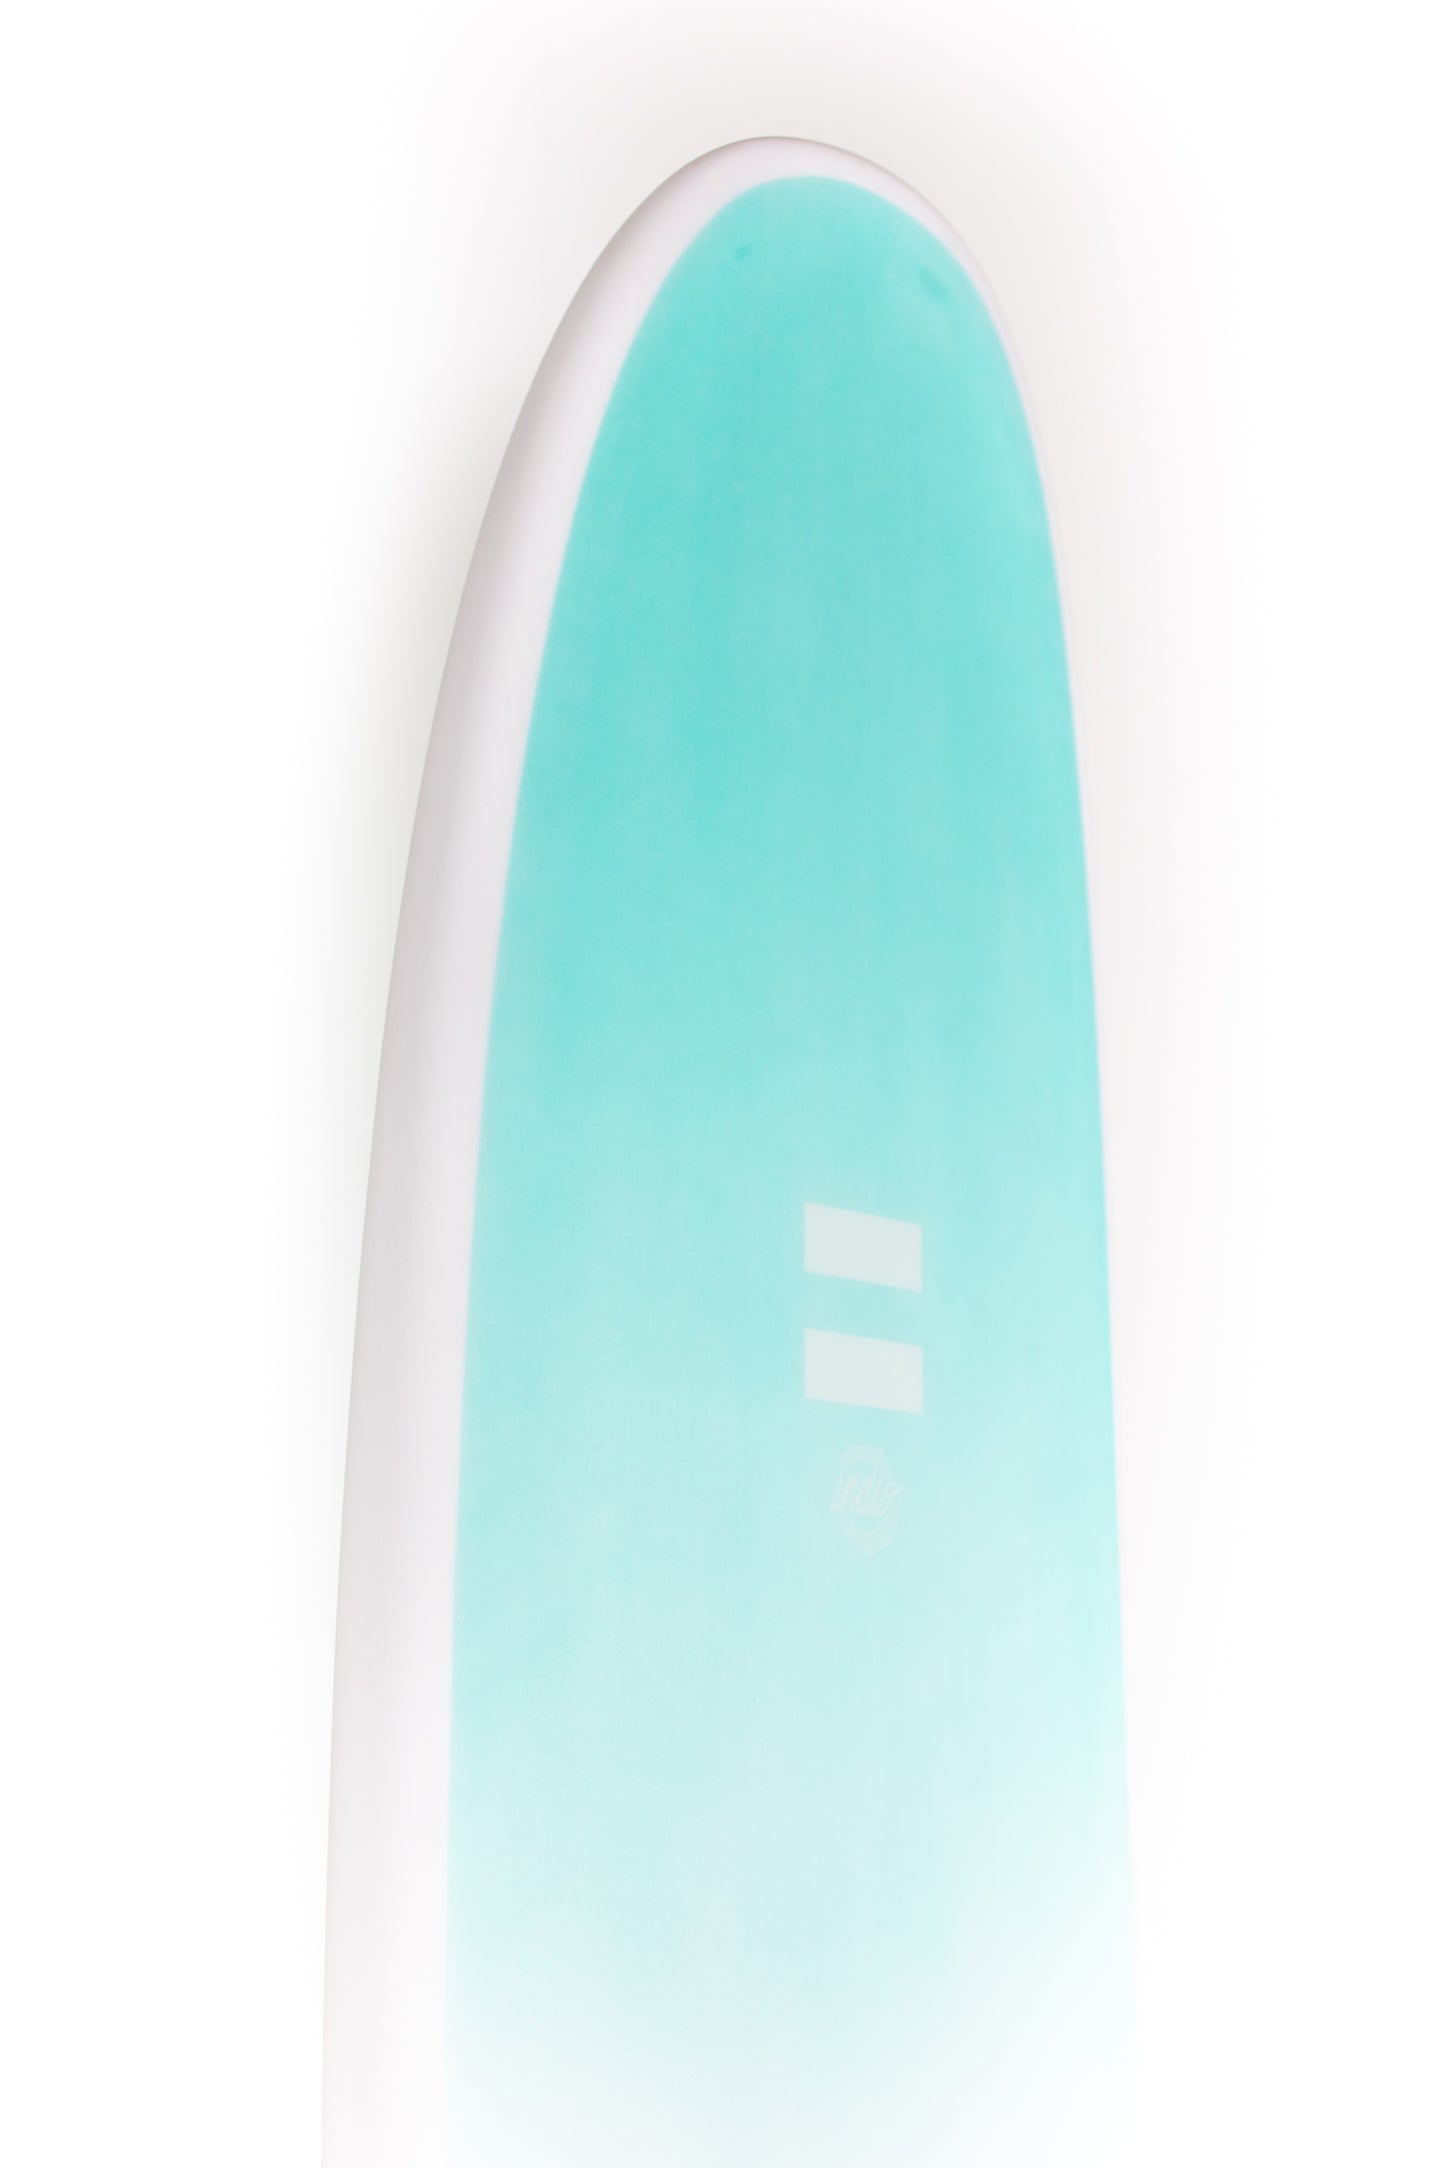 
                  
                    Pukas Surf Shop -  Indio Surfboards - MID LENGTH India 2 - 7'6" x 21 1/2 x 2 7/8 - 53,10l.
                  
                